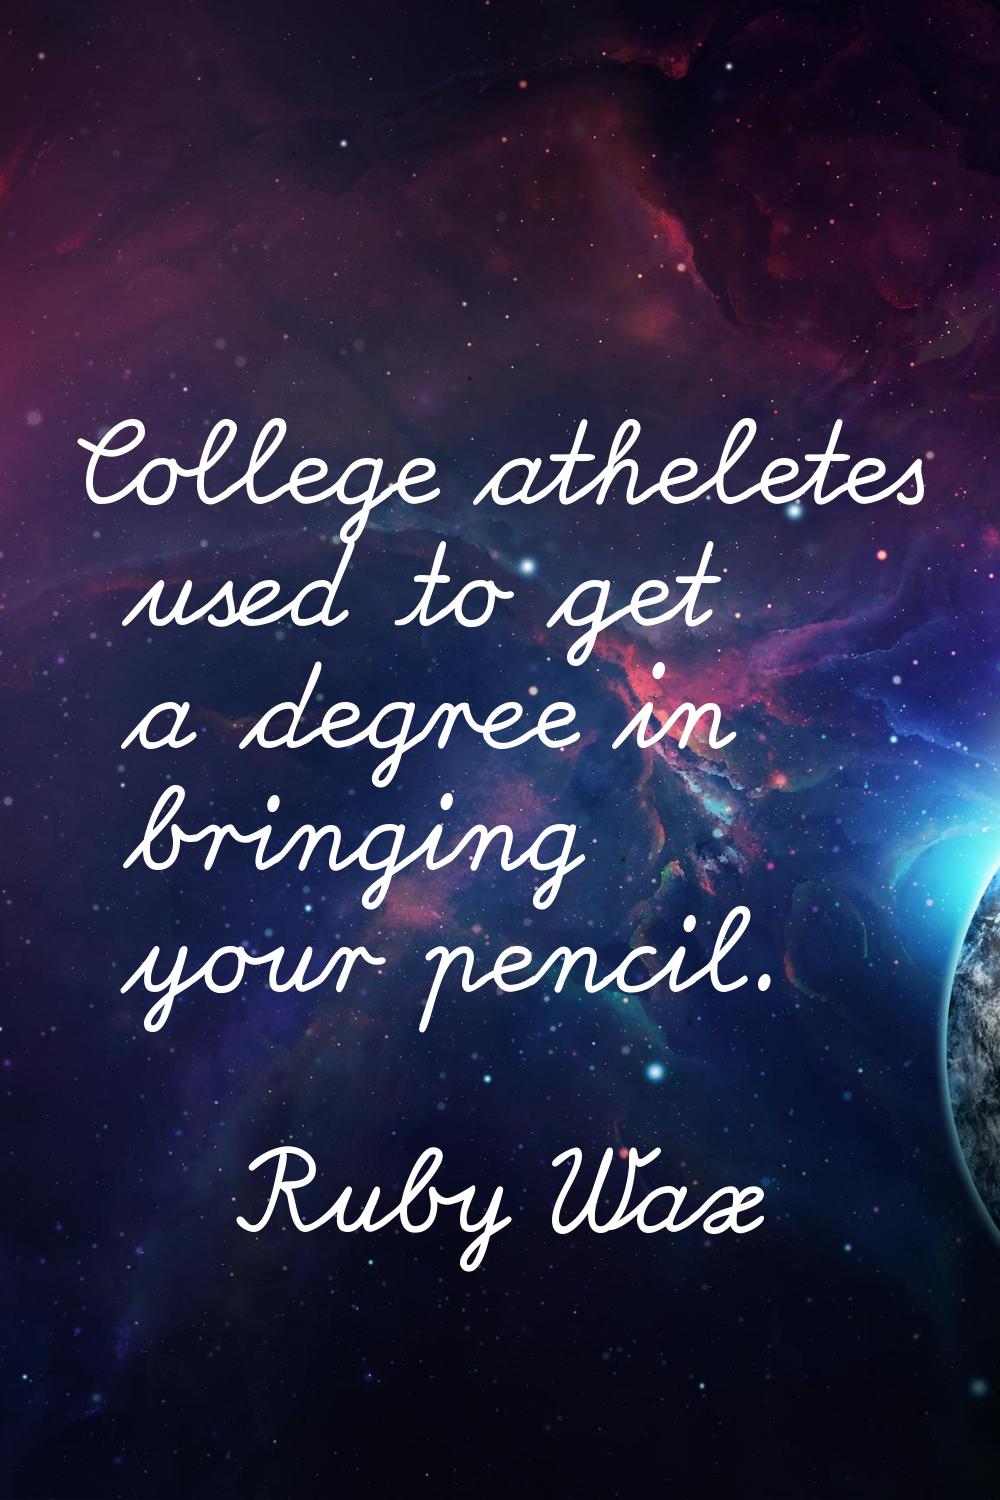 College atheletes used to get a degree in bringing your pencil.